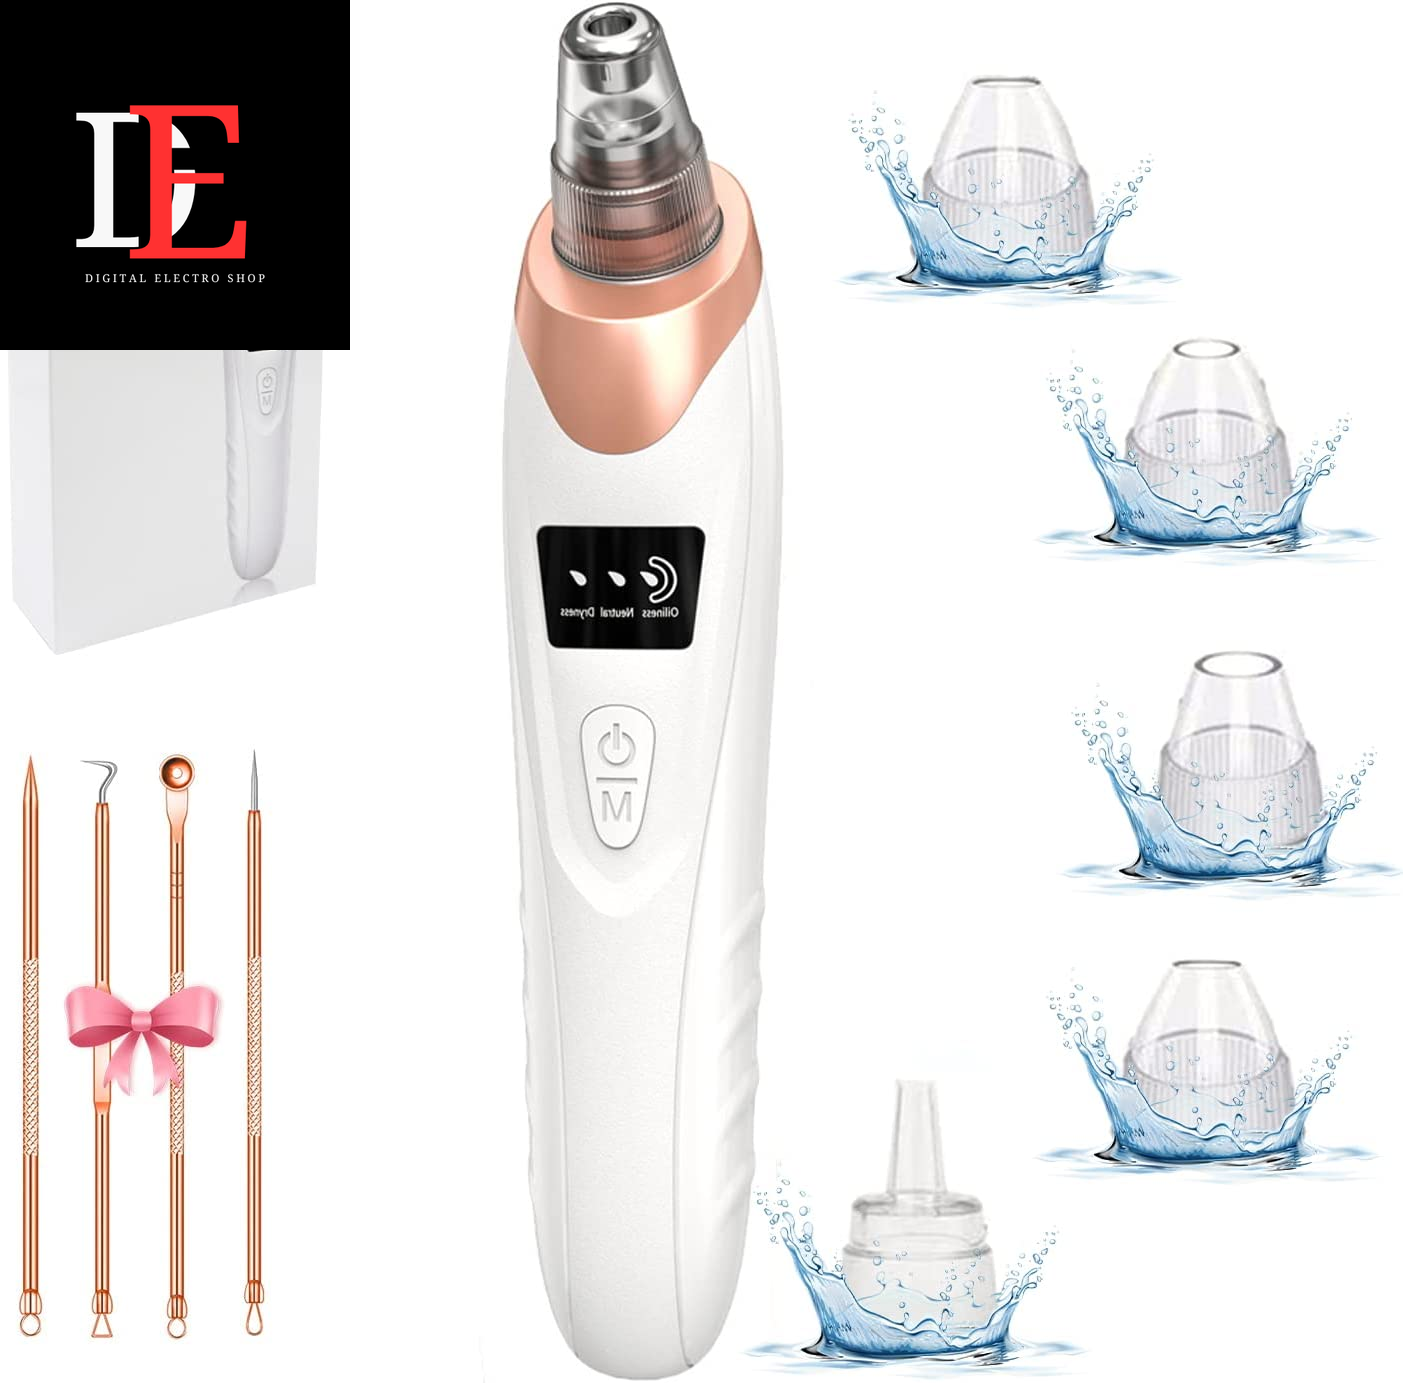 Newest USB Rechargeable Electric Acne Extractor Tool for Adults, Blackhead Remover Pore Vacuum with 5 Suction Power Levels, 5 Probes.